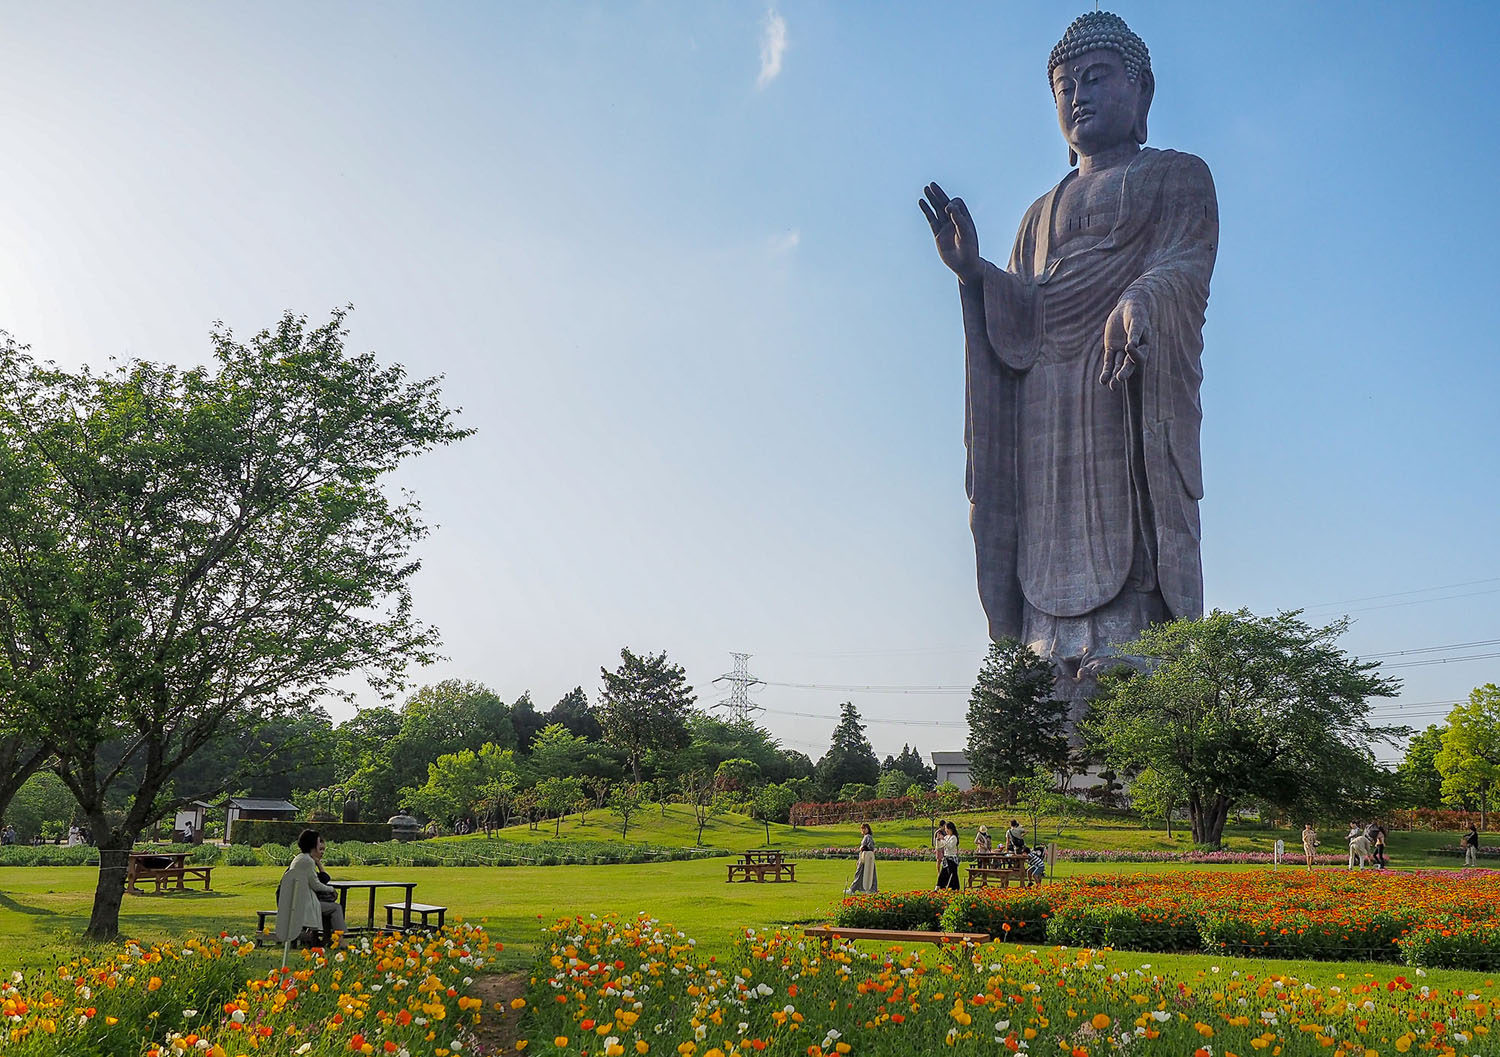 What Are the 5 Tallest Statues in the World?